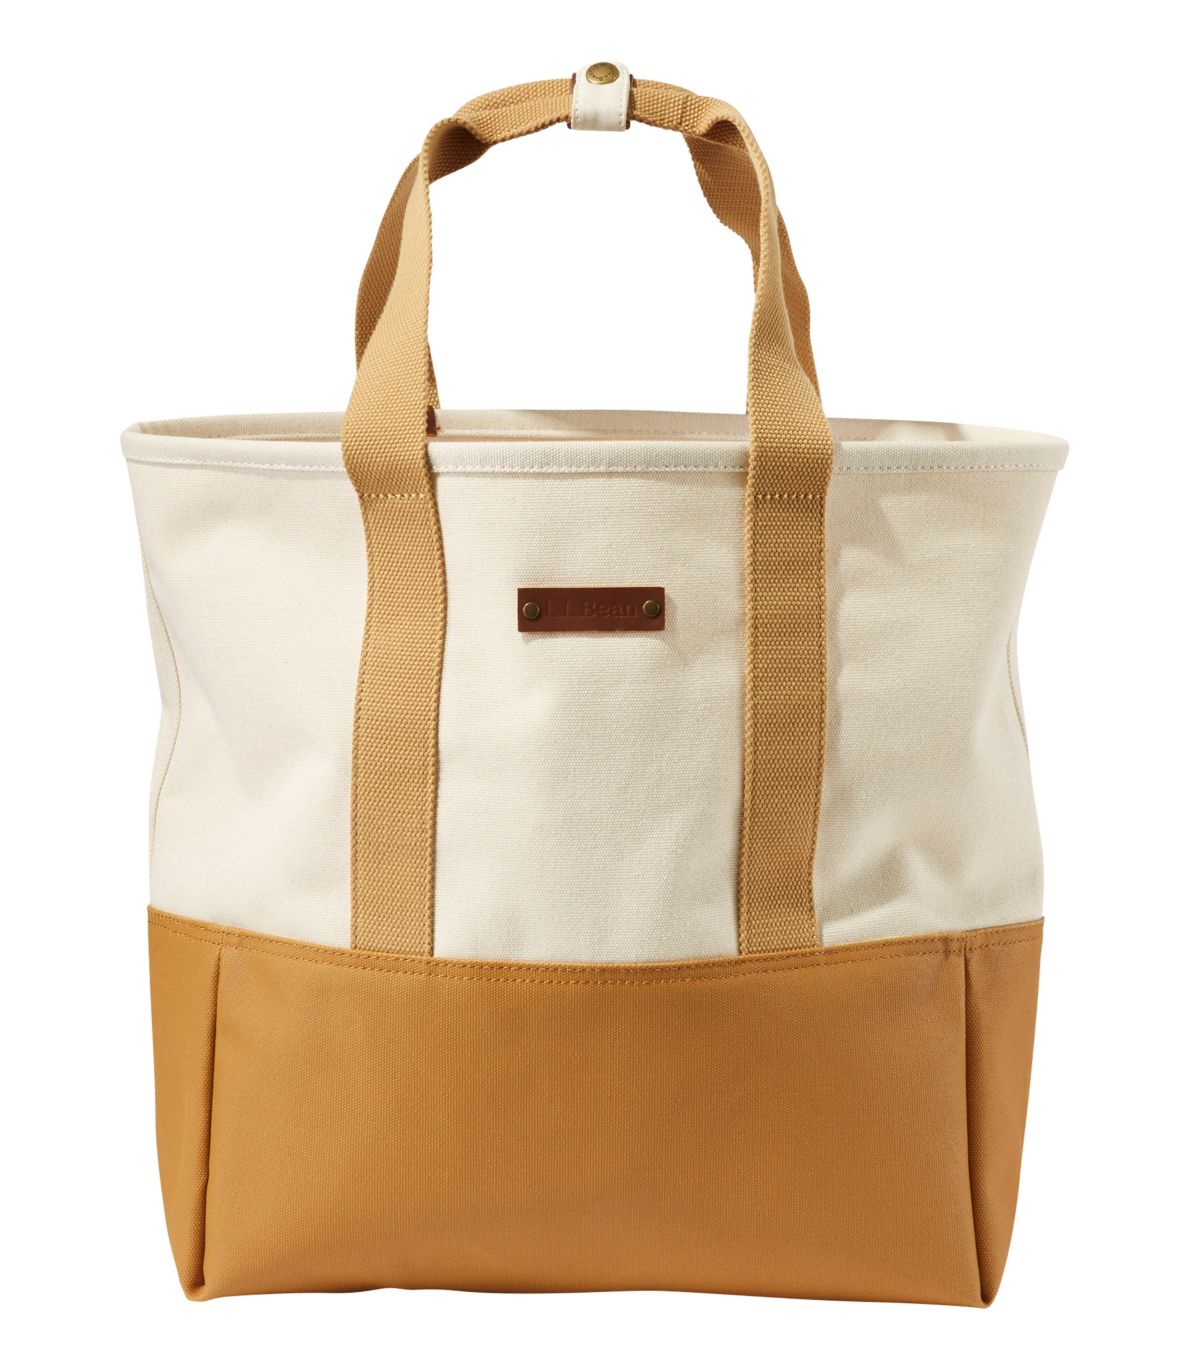 Nor'easter Tote Bag, Open-Top